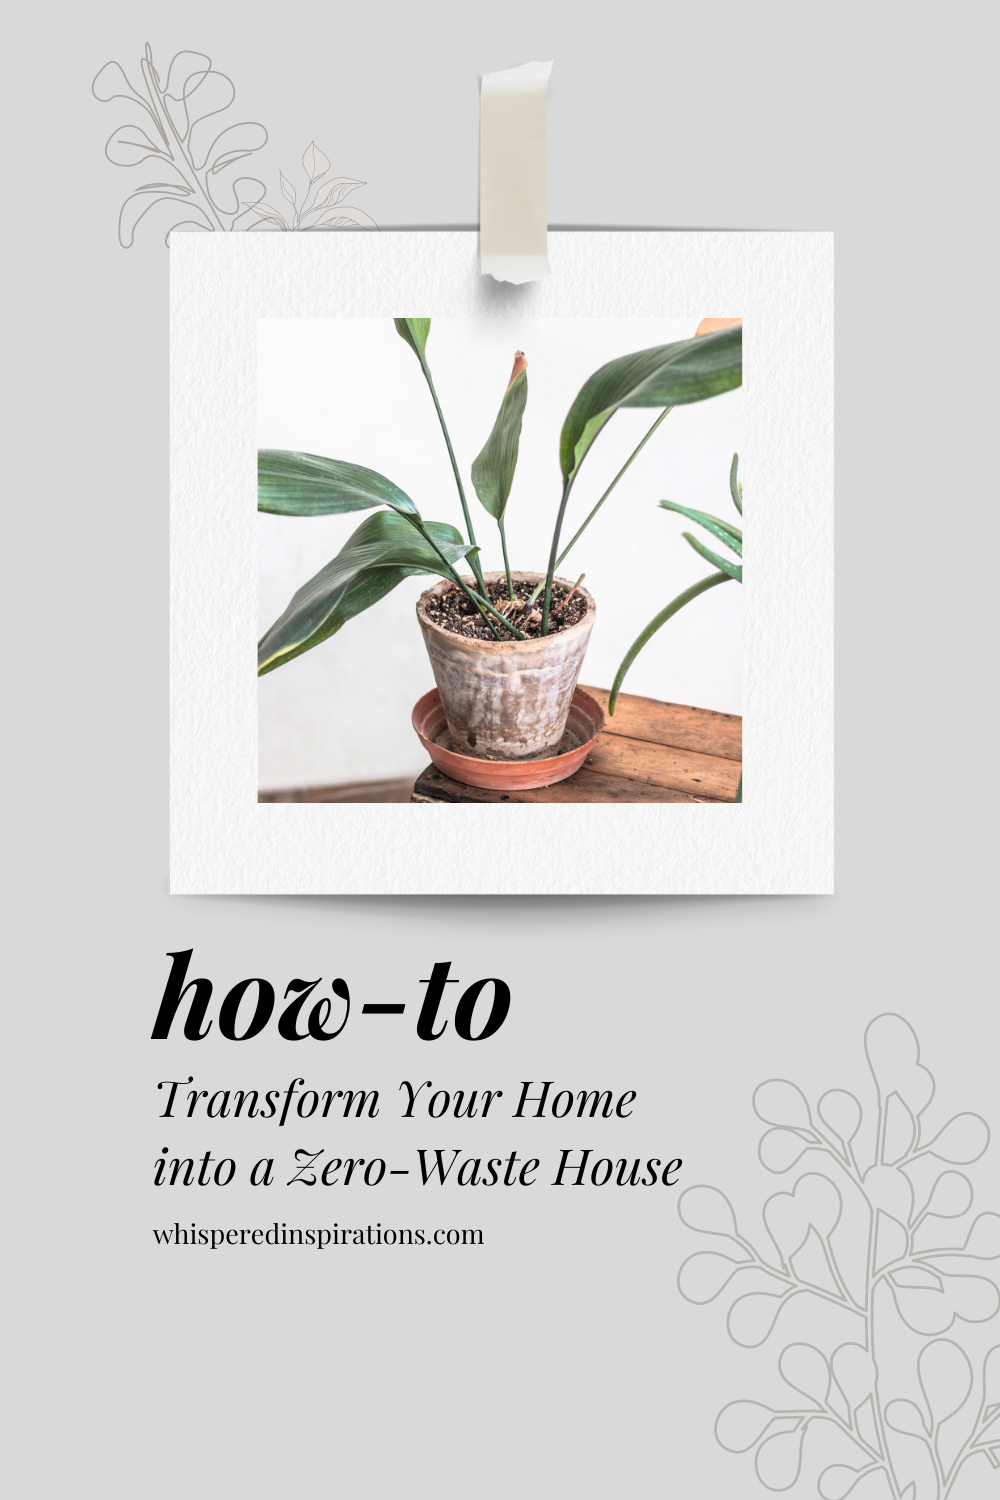 A beautiful houseplant that would be inside an eco-friendly home. This article covers how to transform your home into a zero waste house.